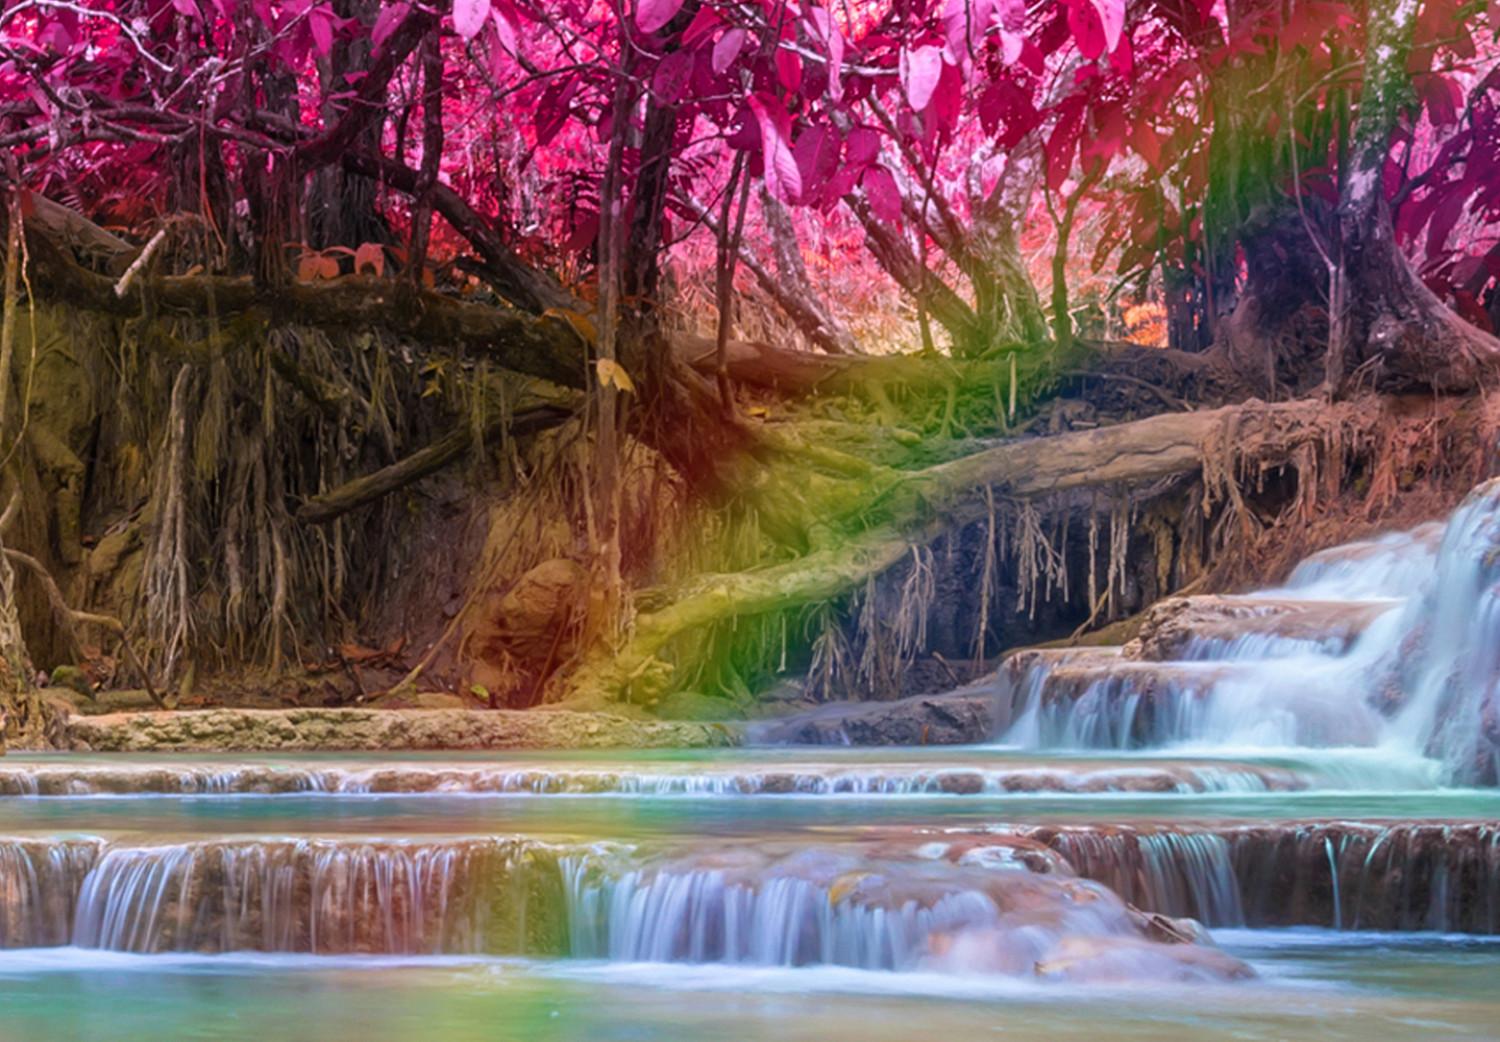 Cuadro decorativo Pink Trees and Waterfall (1 Part) Wide